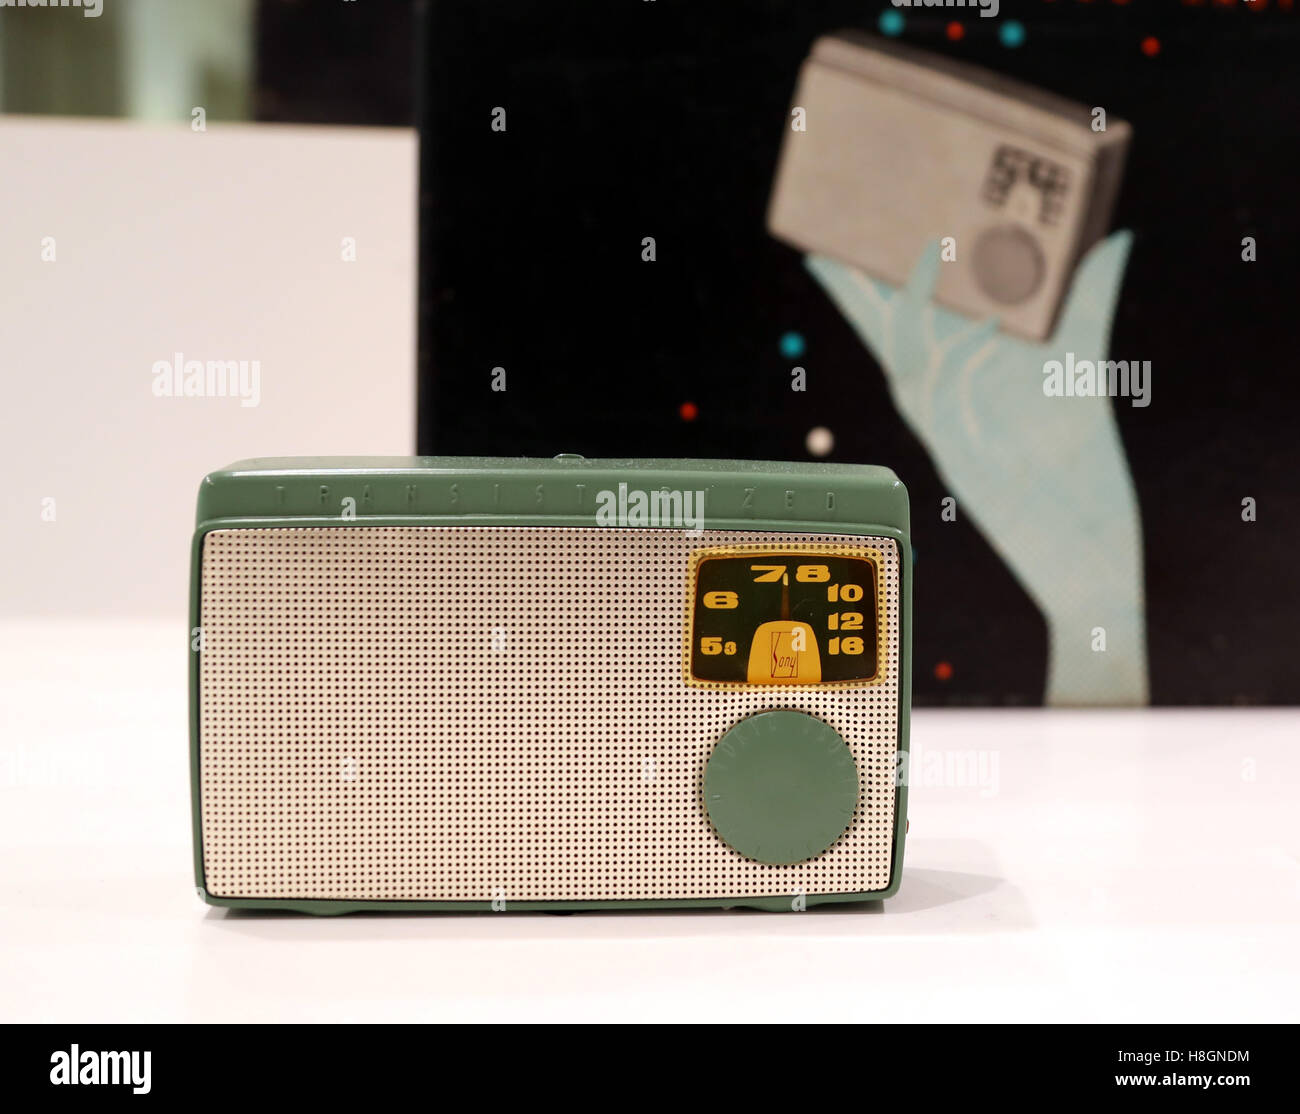 Tokyo, Japan. 12th Nov, 2016. Japan's electronics giant Sony displays the company's transistor radio recerver 'TR-55' produced in 1955 at the company's retrospective exhibition 'It's a Sony exhibition' at the Sony building in Ginza in Tokyo on Saturday, November 12, 2016. Sony exhibited the company's historical products at the building which was built 50 years ago as Sony will close Sony's landnark Sony building on March 31, 2017 and will open Sony park in 2018 at the place. Credit:  Yoshio Tsunoda/AFLO/Alamy Live News Stock Photo